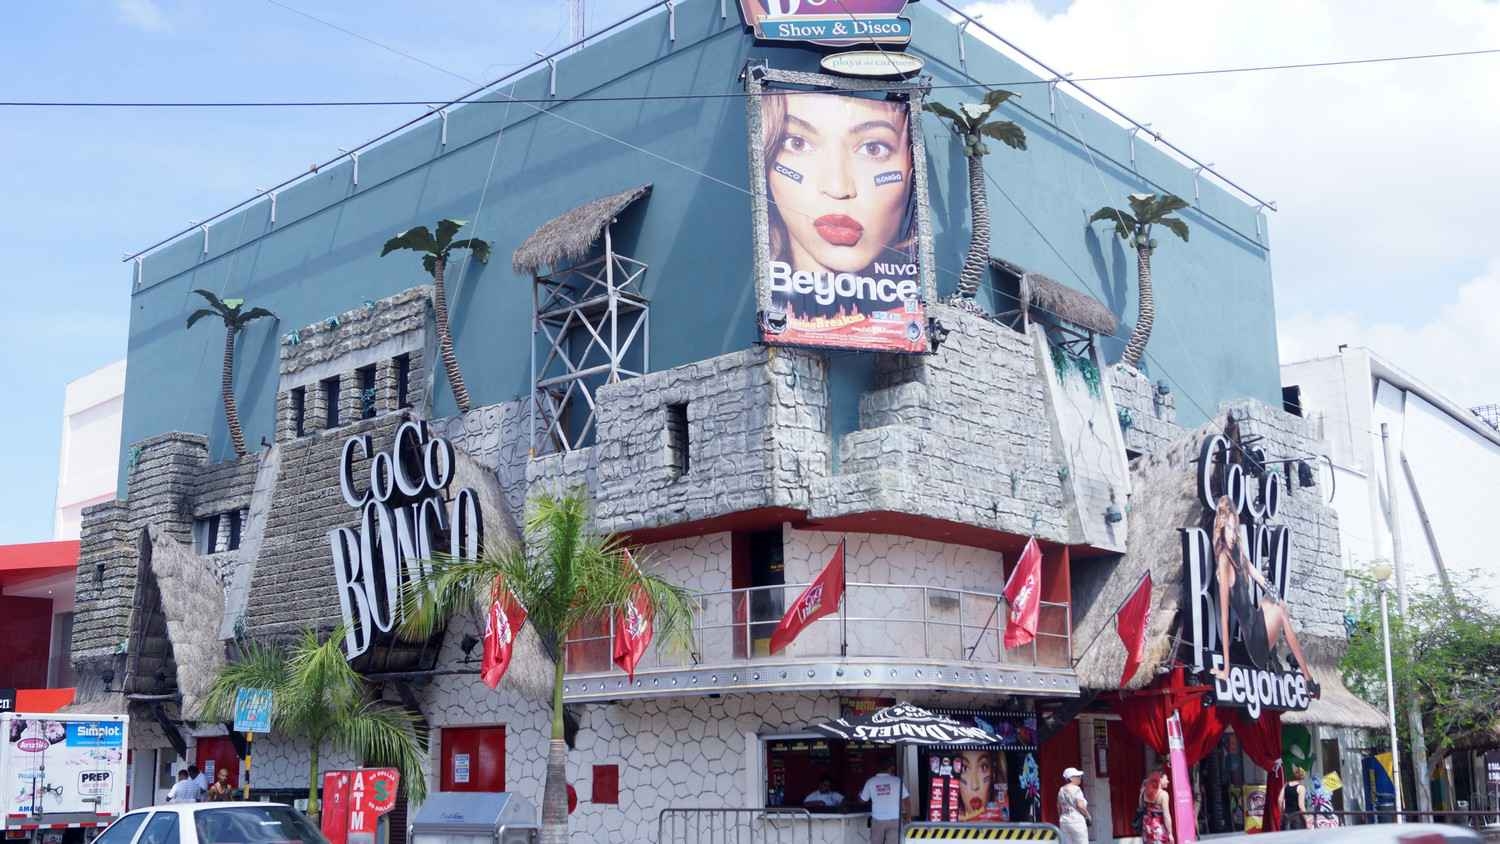 The Coco Bongo club featuring a Beyonce look-alike.